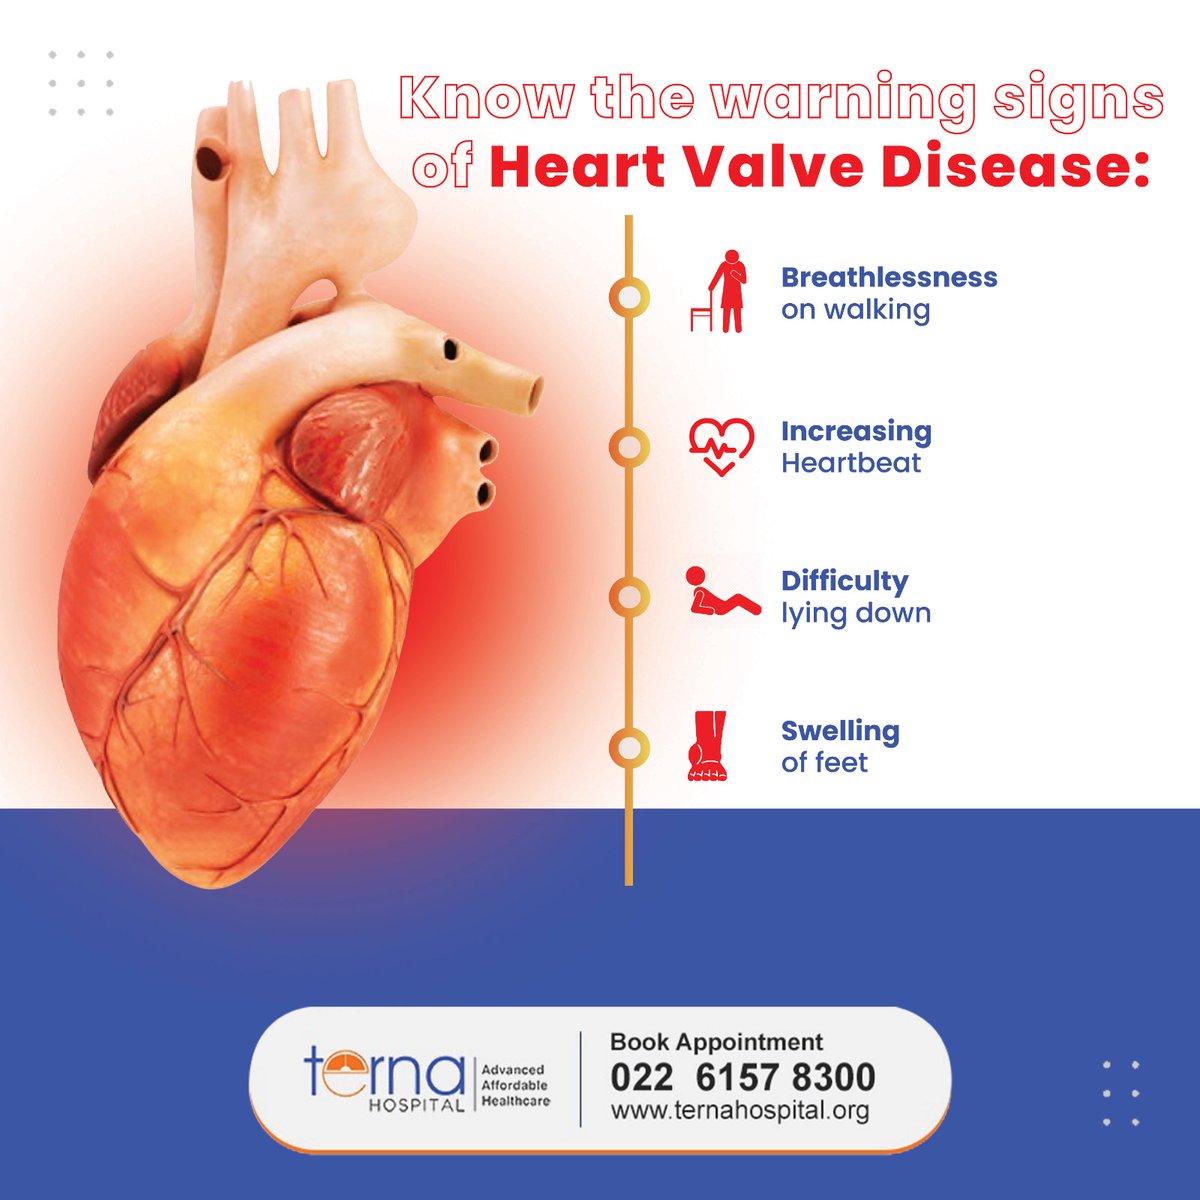 Heart Valve Disease is a serious disease that could become life-threatening if left untreated. It can cause several complications, including heart failure, blood clots, stroke. Don't ignore these warning signs.
#TernaHospital #navimumbai #multispecialityhospital #heartspecialist